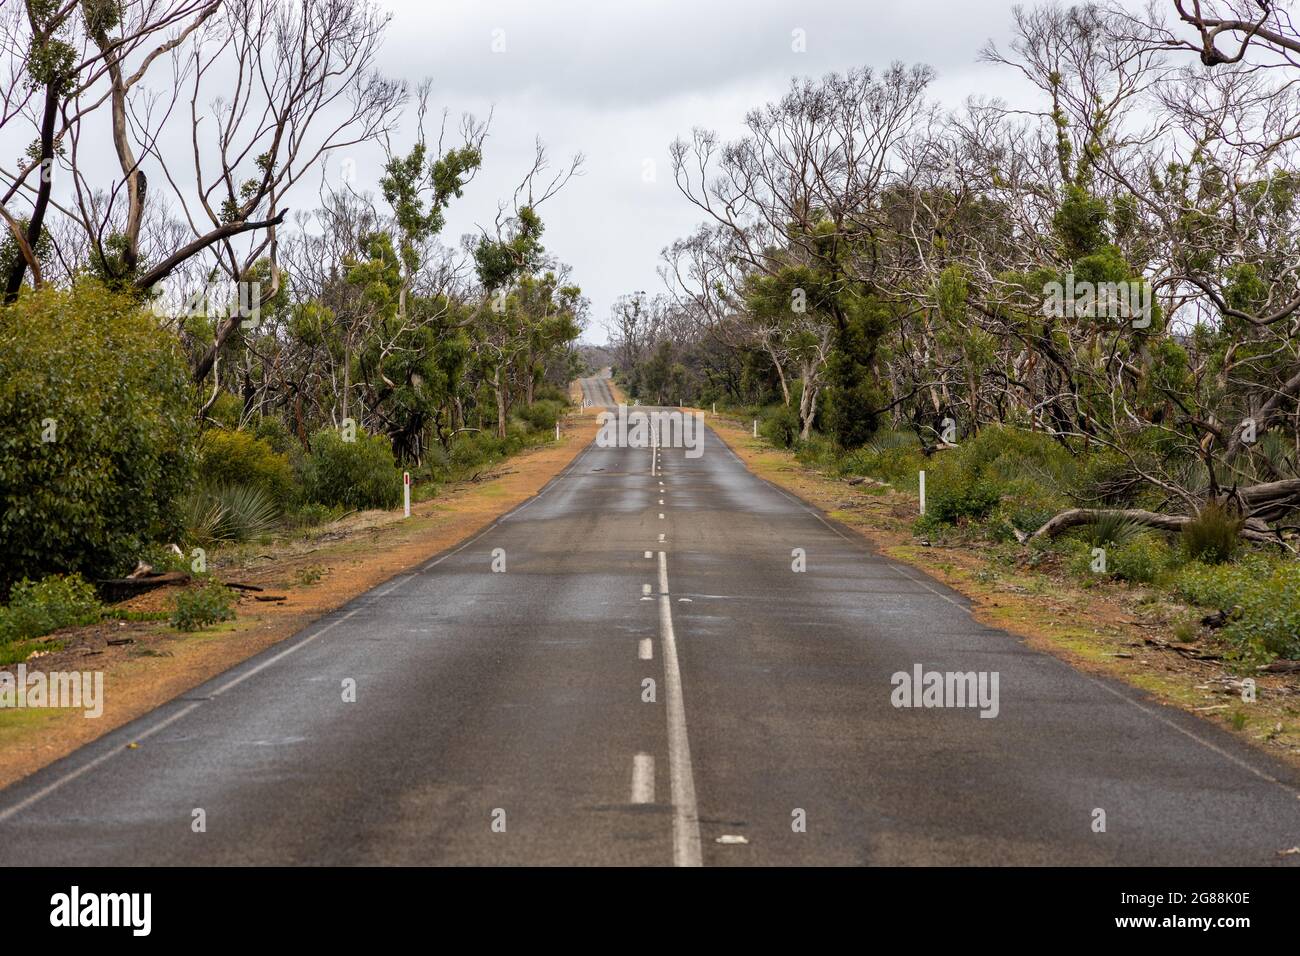 A road winding down with rejuvenating trees  on both side in Kangaroo Island South Australia Stock Photo